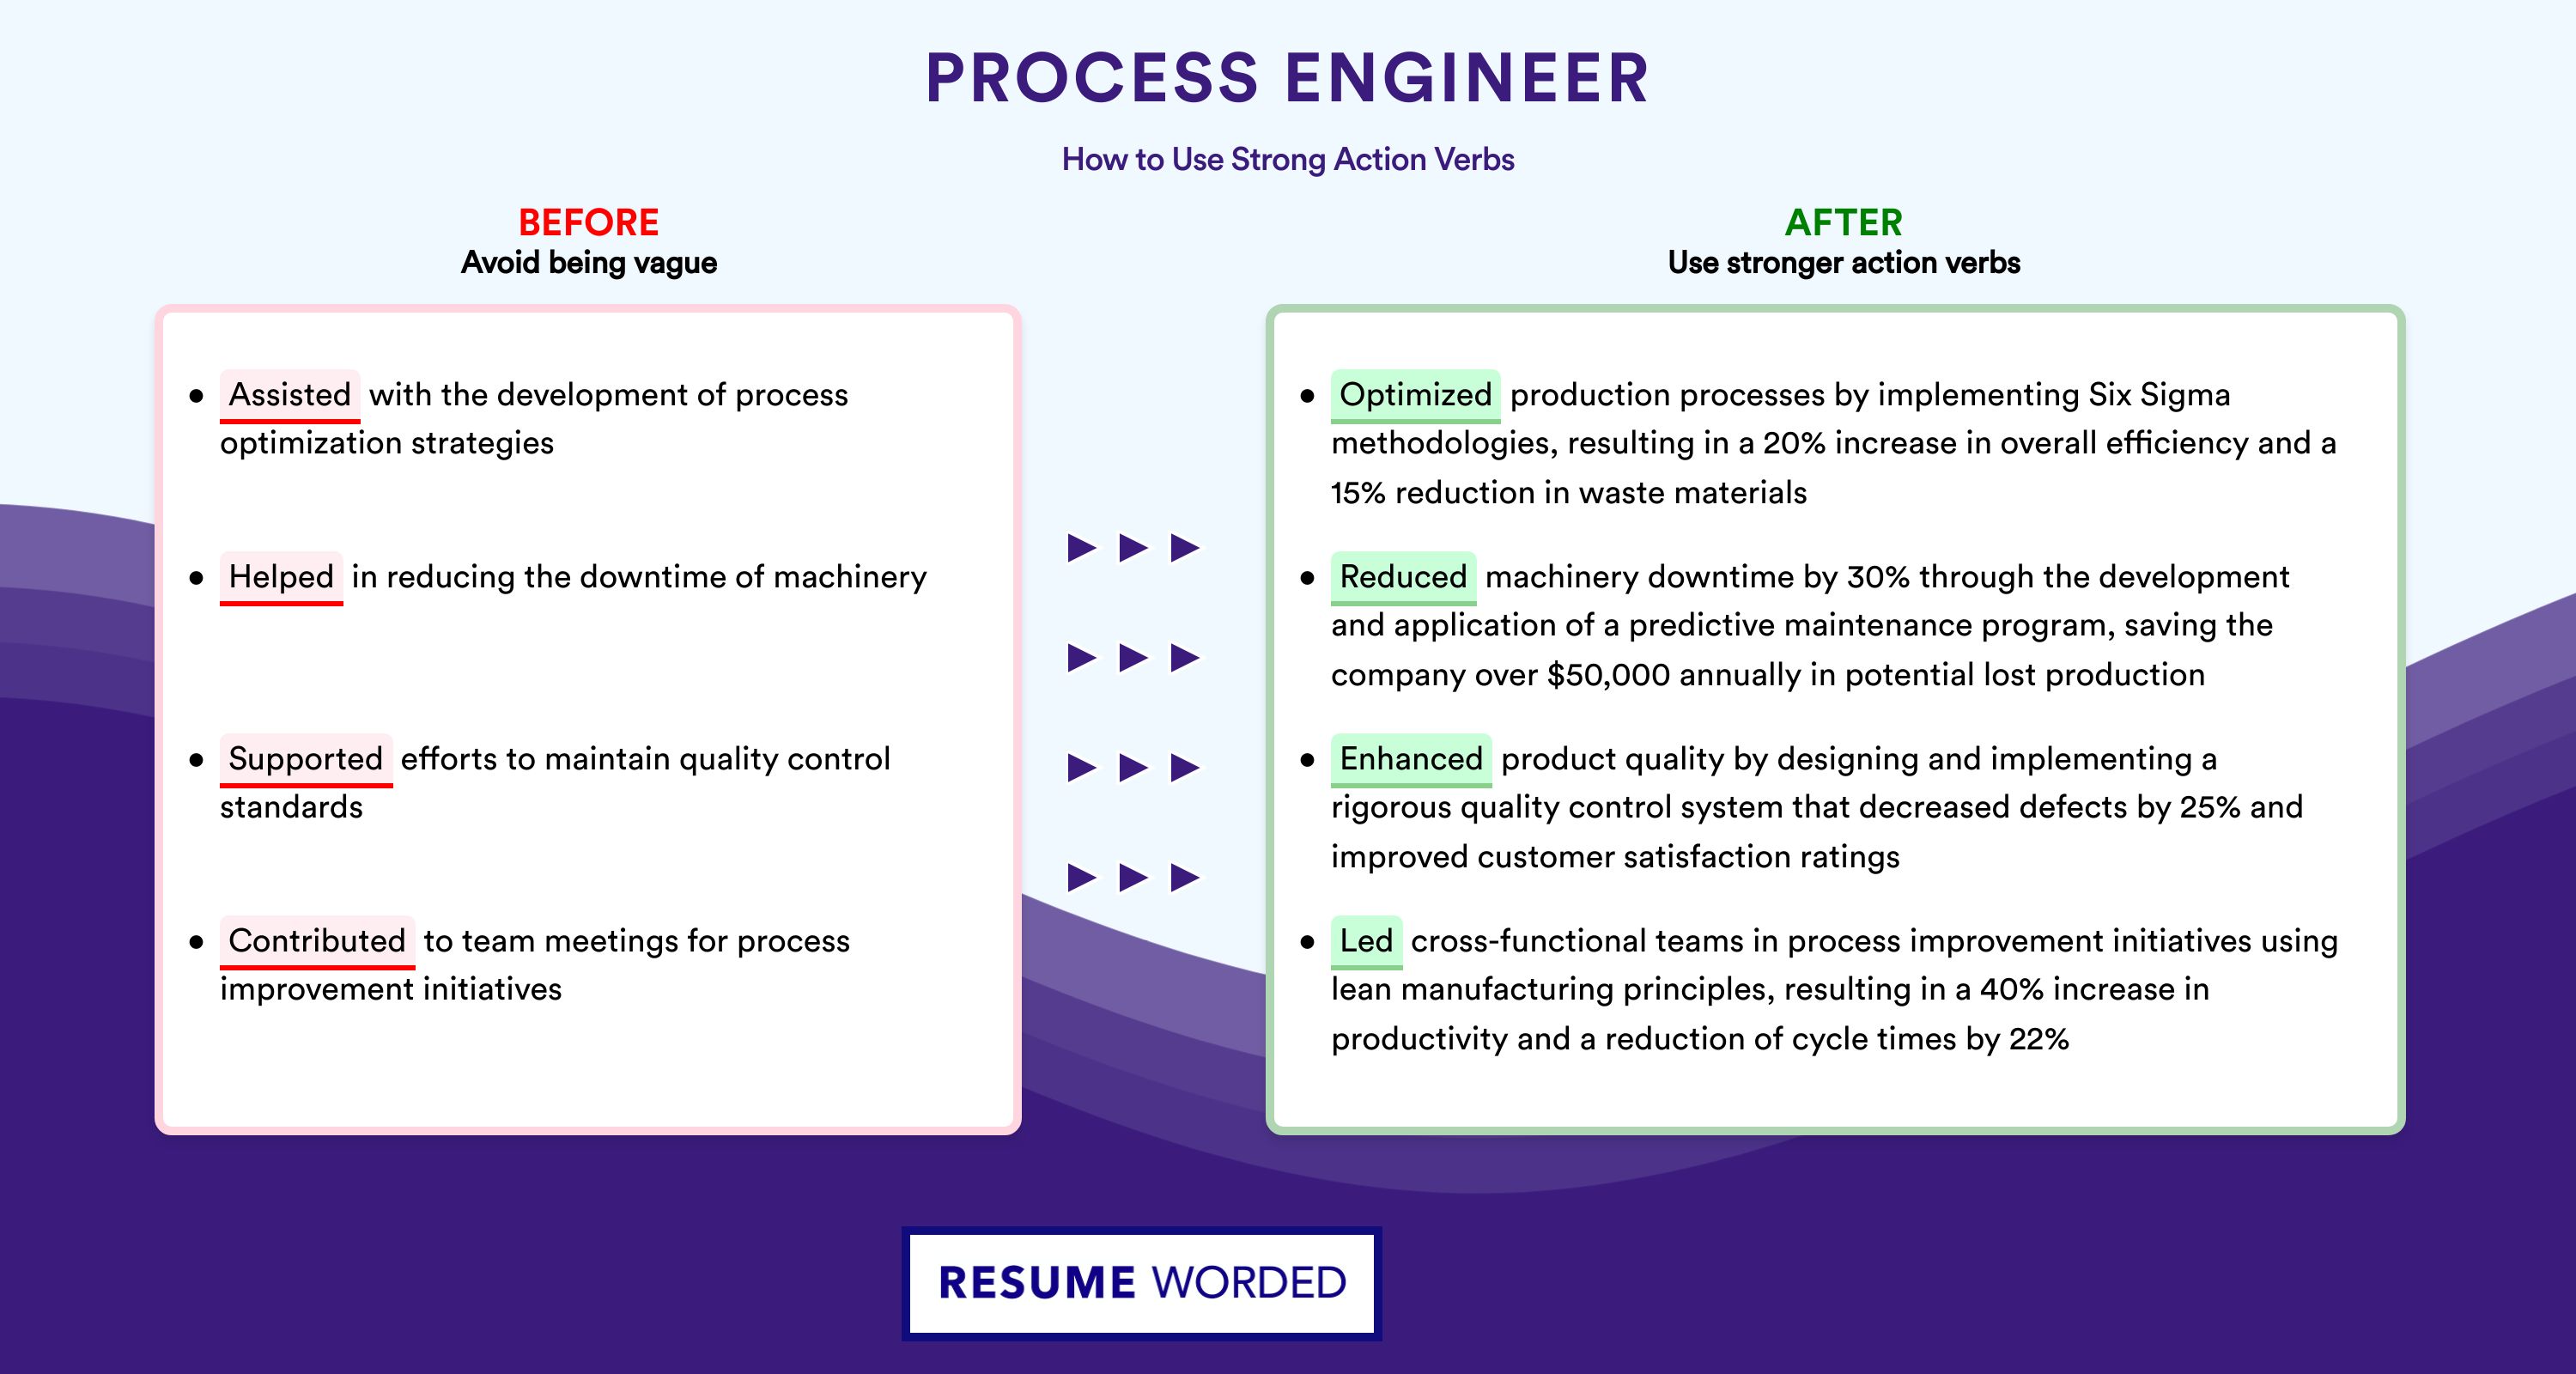 Action Verbs for Process Engineer